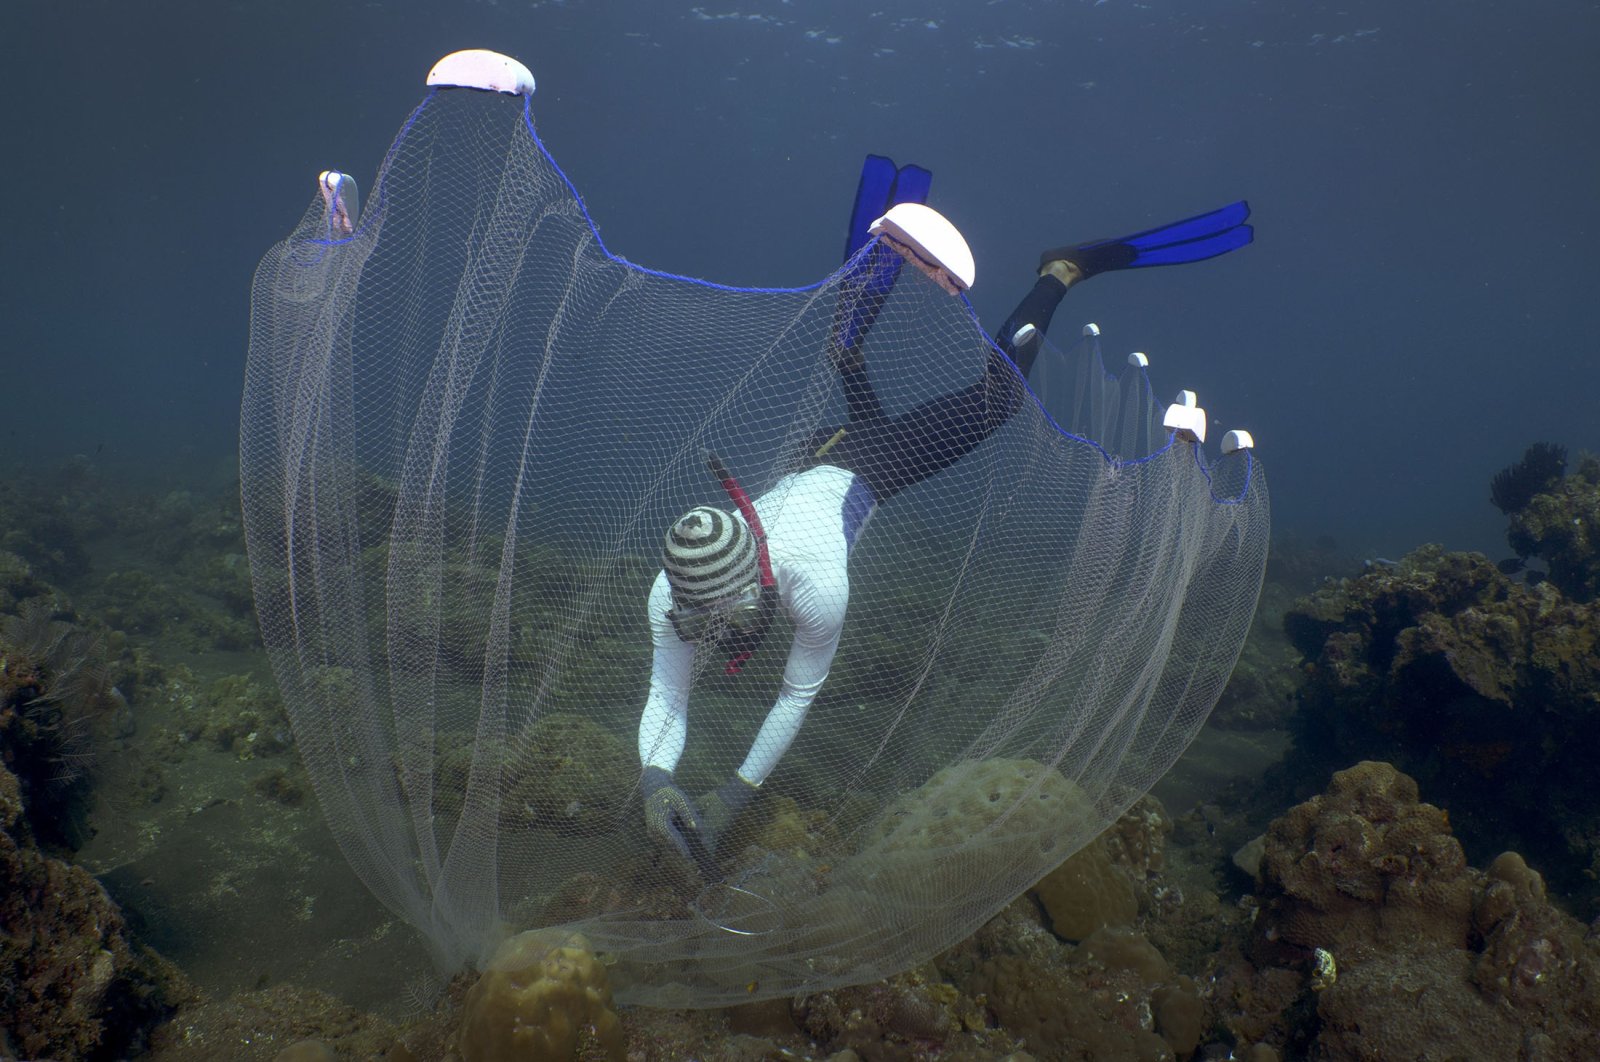 Made Partiana uses a net to catch aquarium fish on the north coast of Bali, Indonesia, April 10, 2021. (AP Photo)